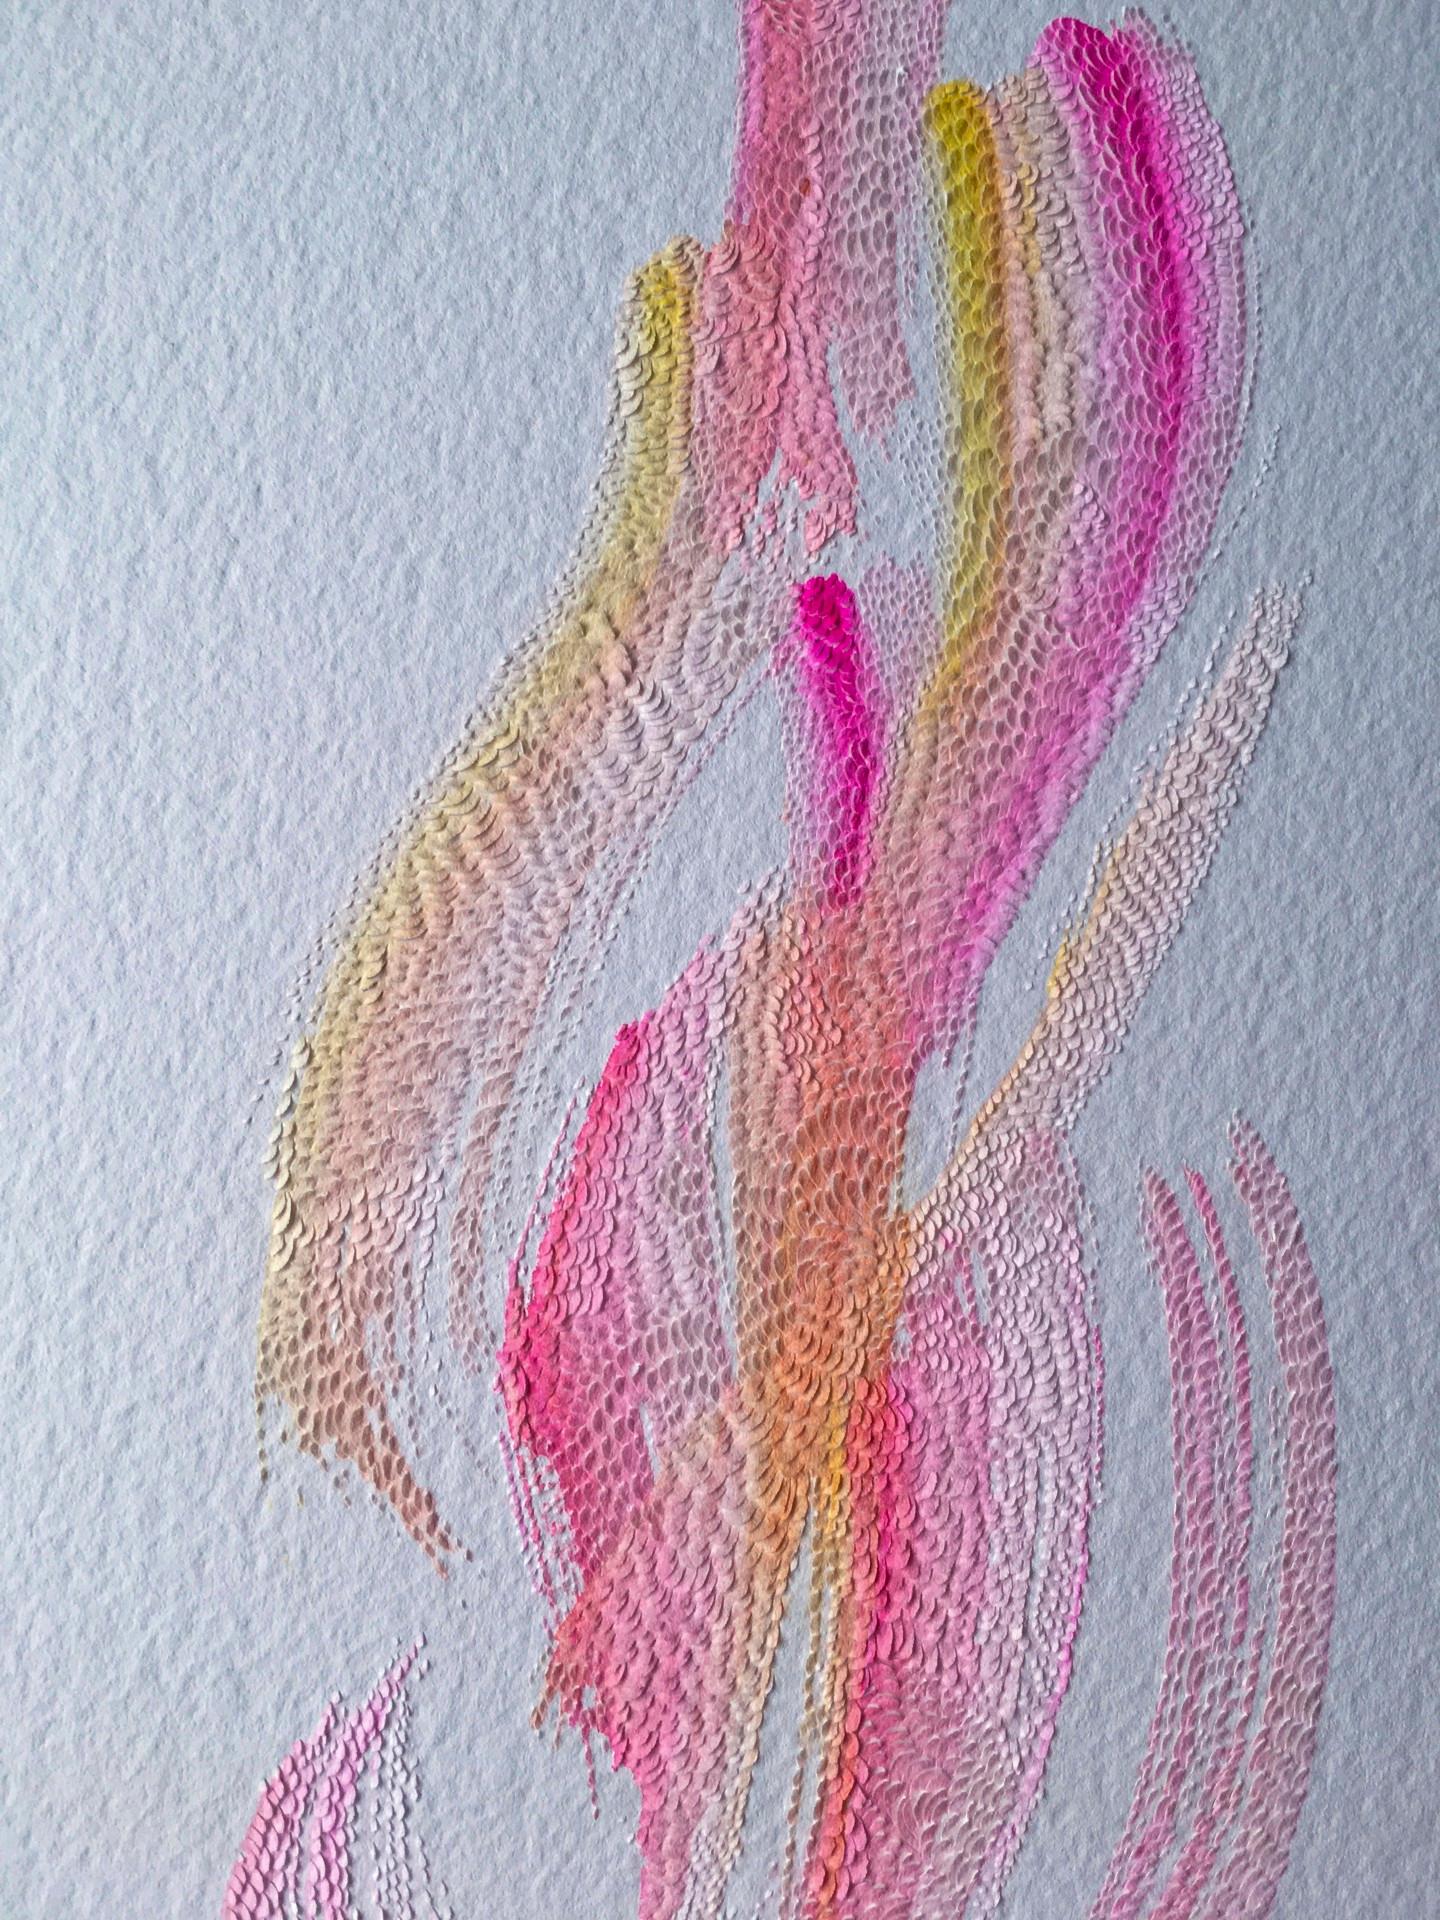 Knife Drawing XX- Abstract Textured Painting w/ Stunning Detail (Pink+Yellow) - Art by Lucha Rodriguez